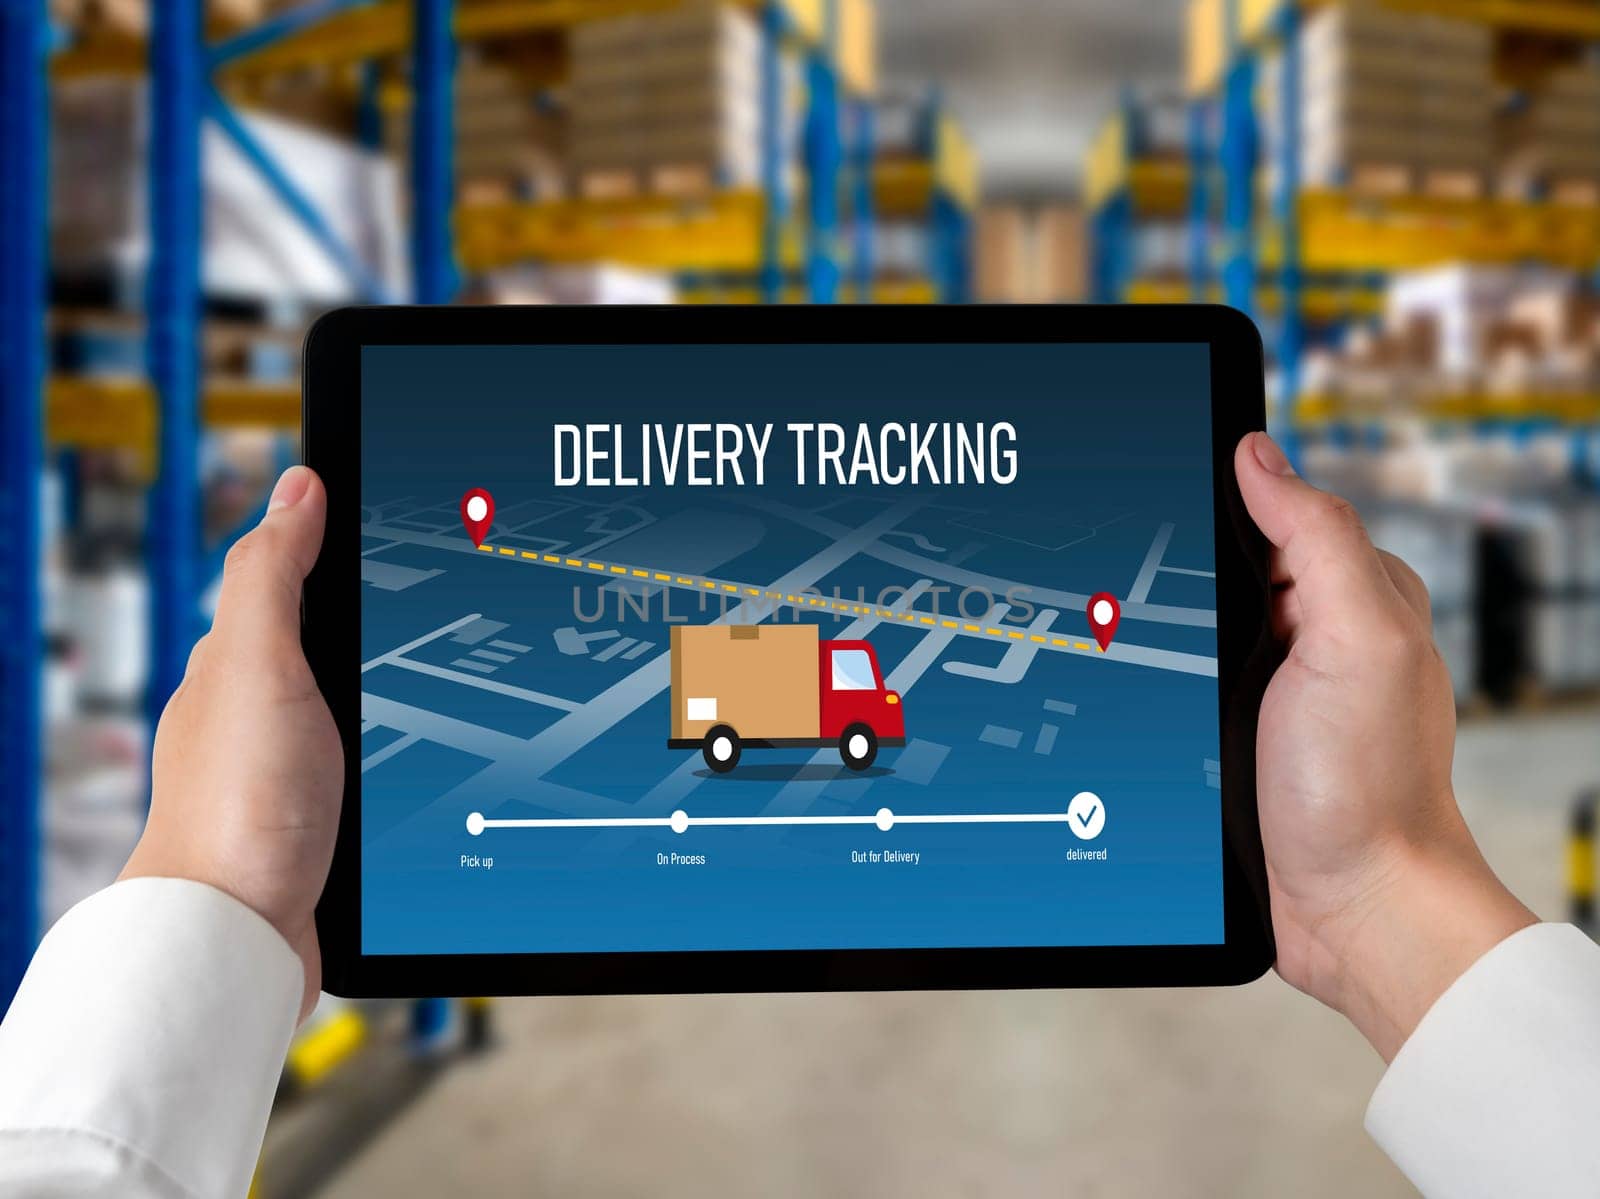 Delivery tracking system for e-commerce and modish online business by biancoblue